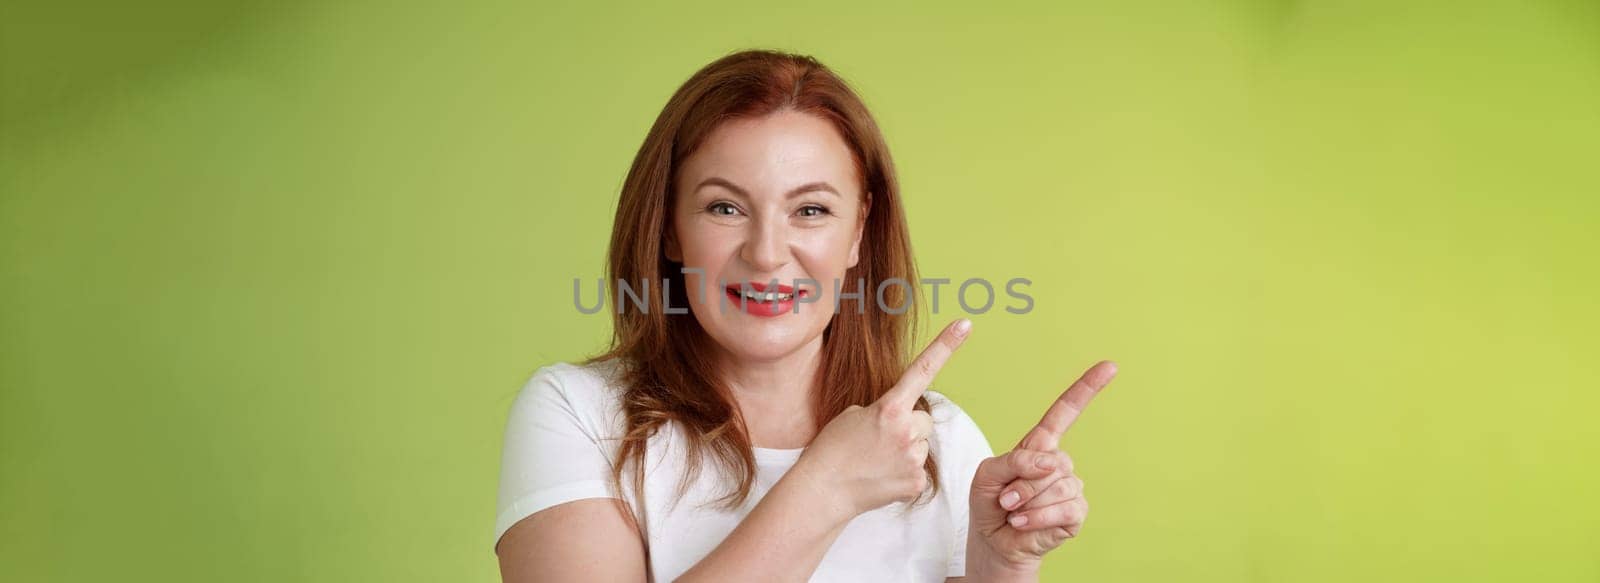 Close-up joyful motivated pleasant redhead middle-aged female. pointing upper left corner index fingers smiling delighted give advice check-out promo good advertisement blank space green background.